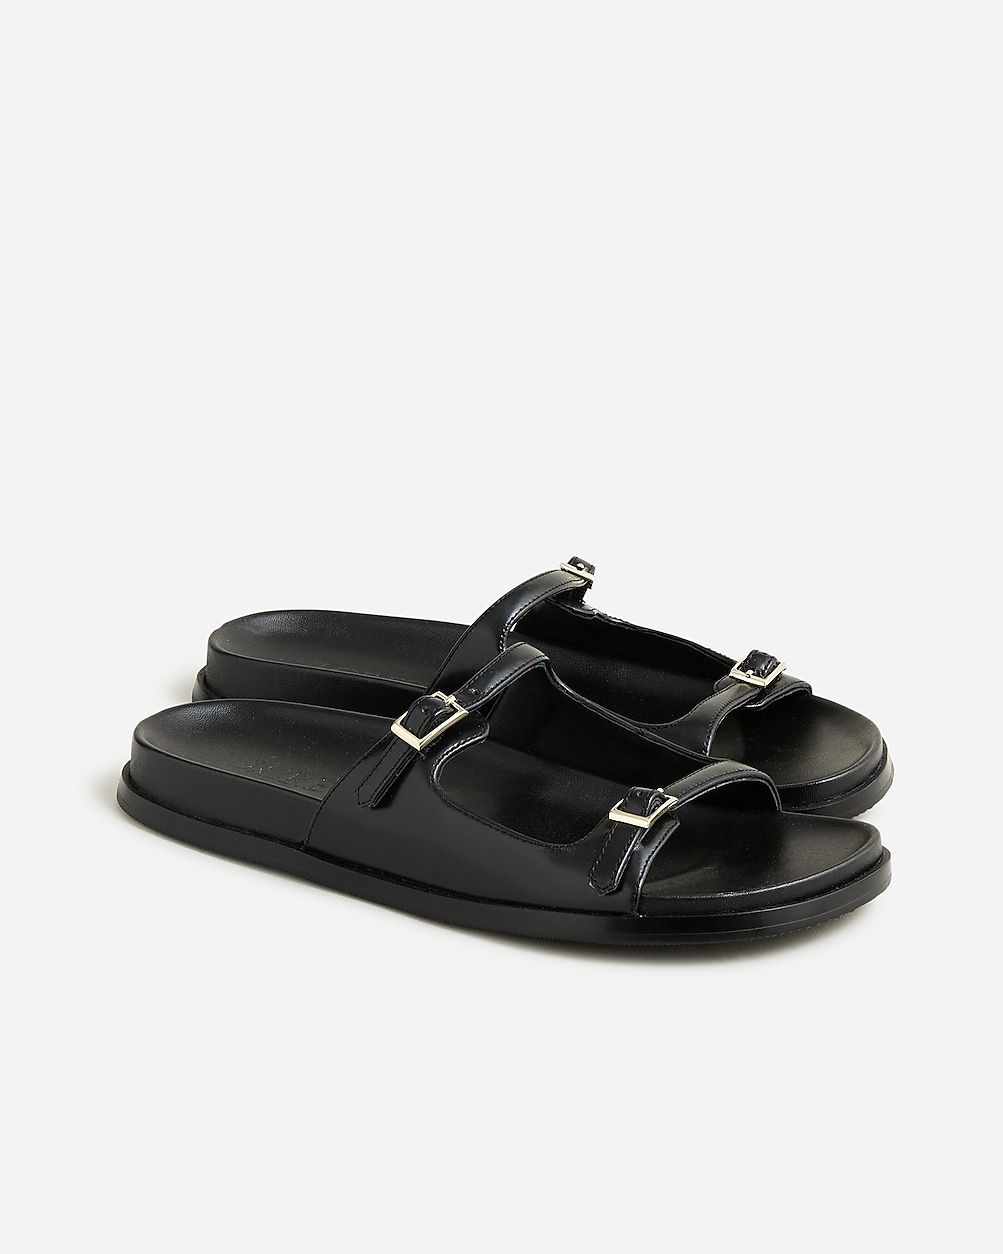 Colbie buckle sandals in leather | J.Crew US